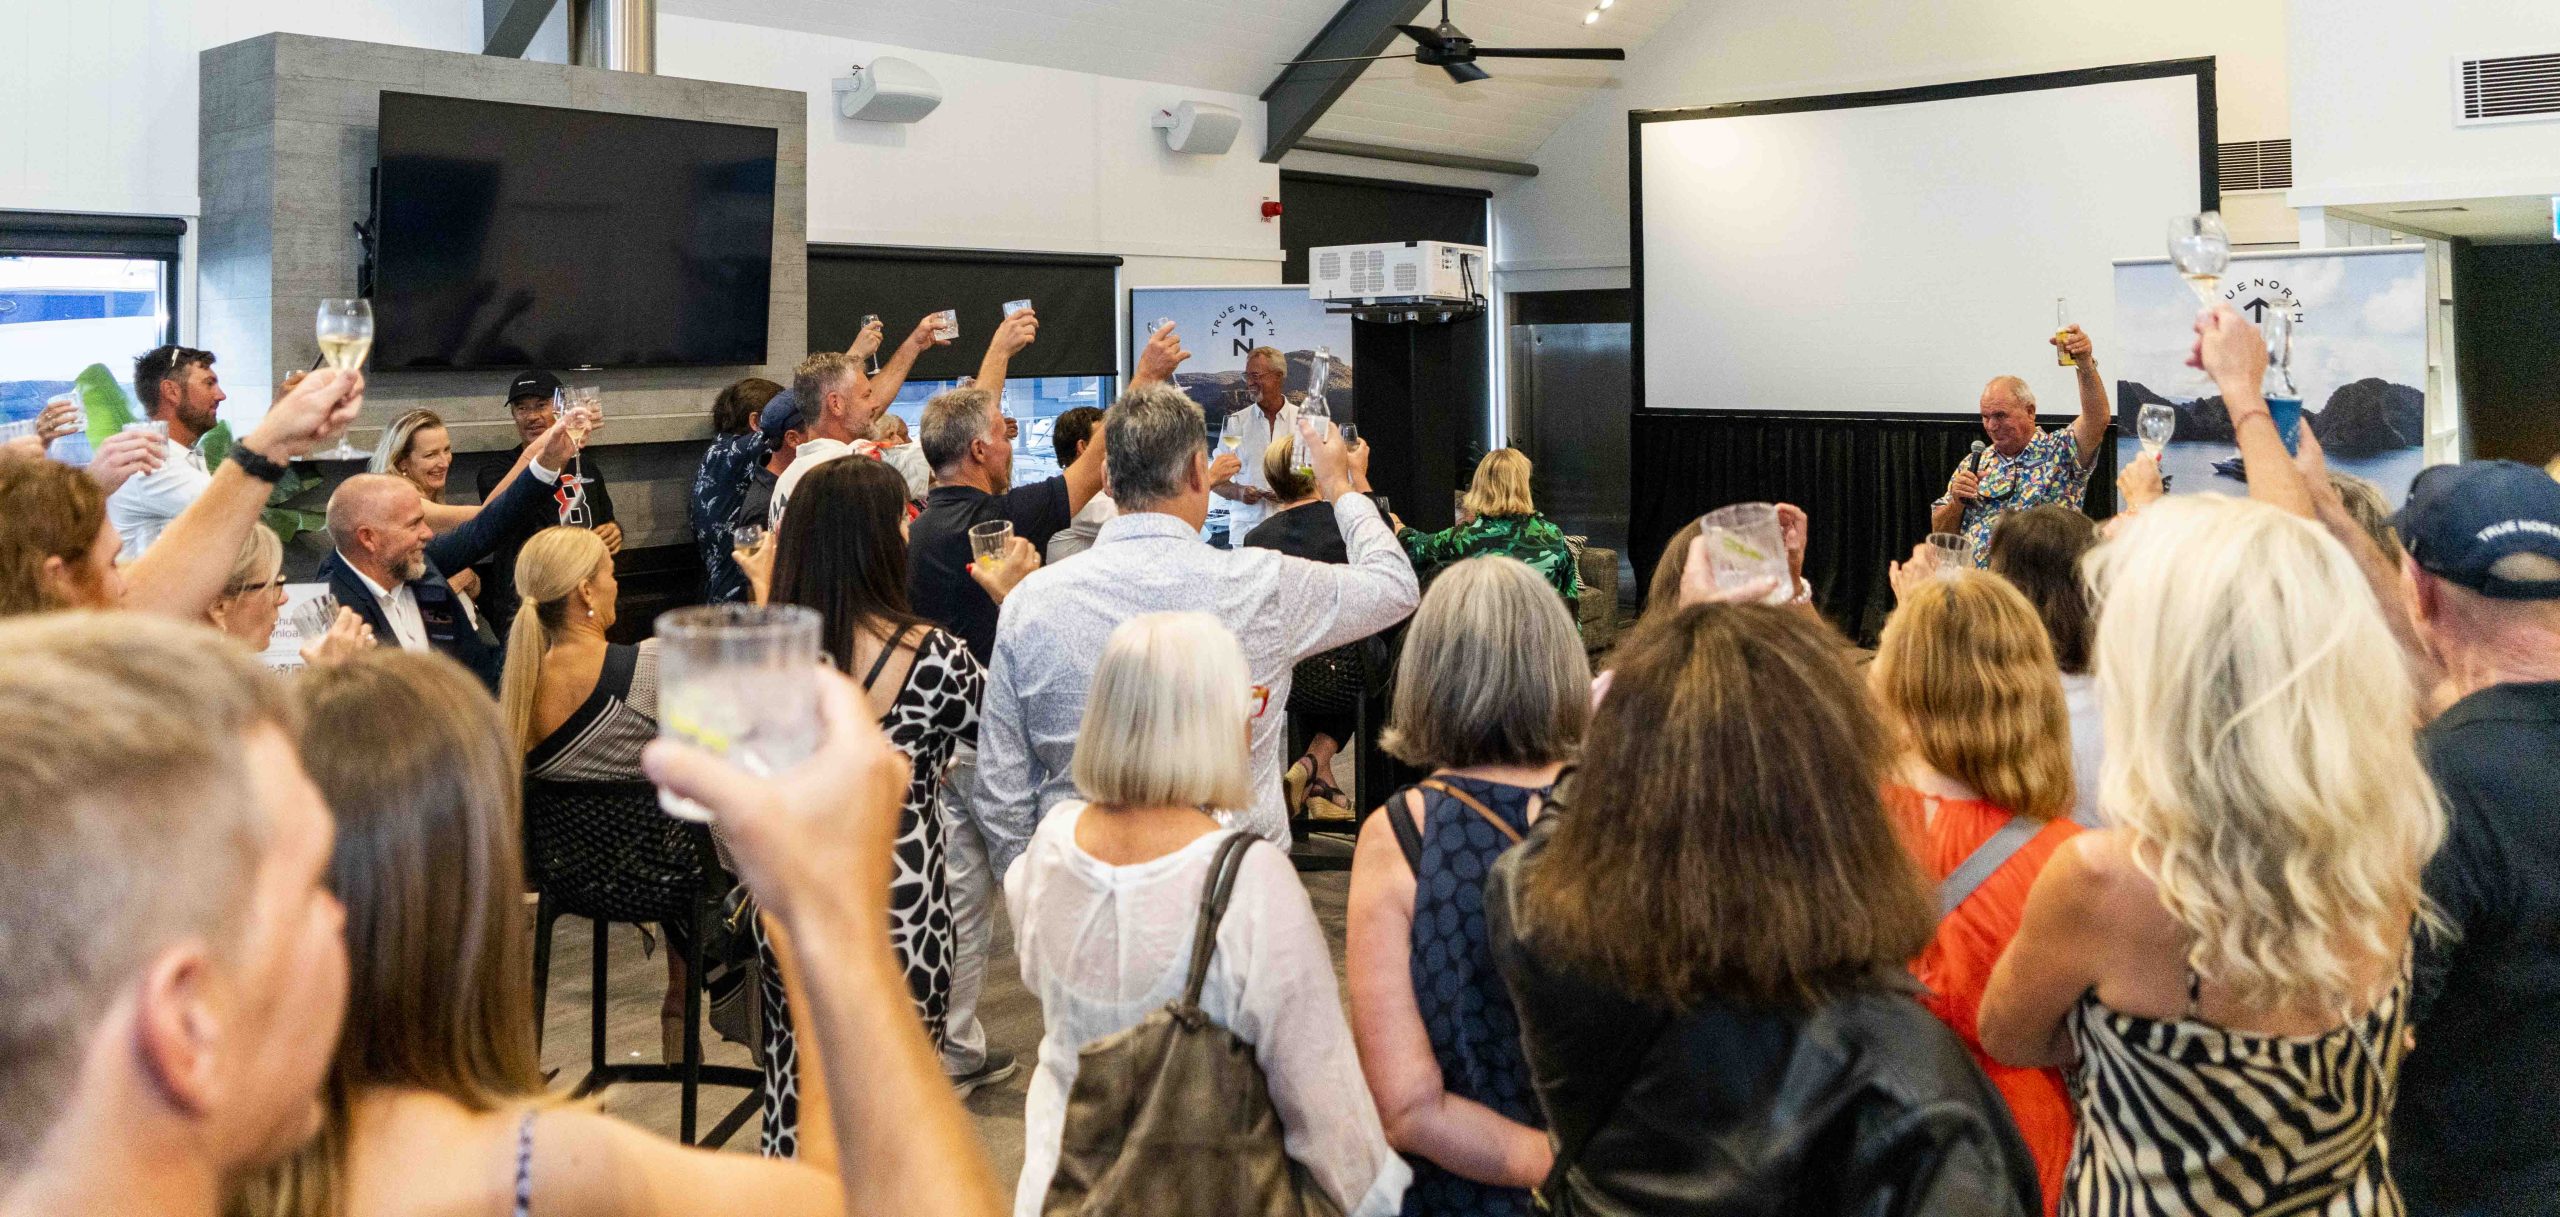 Past guests recently came together to celebrate the launch of TRUE NORTH II 